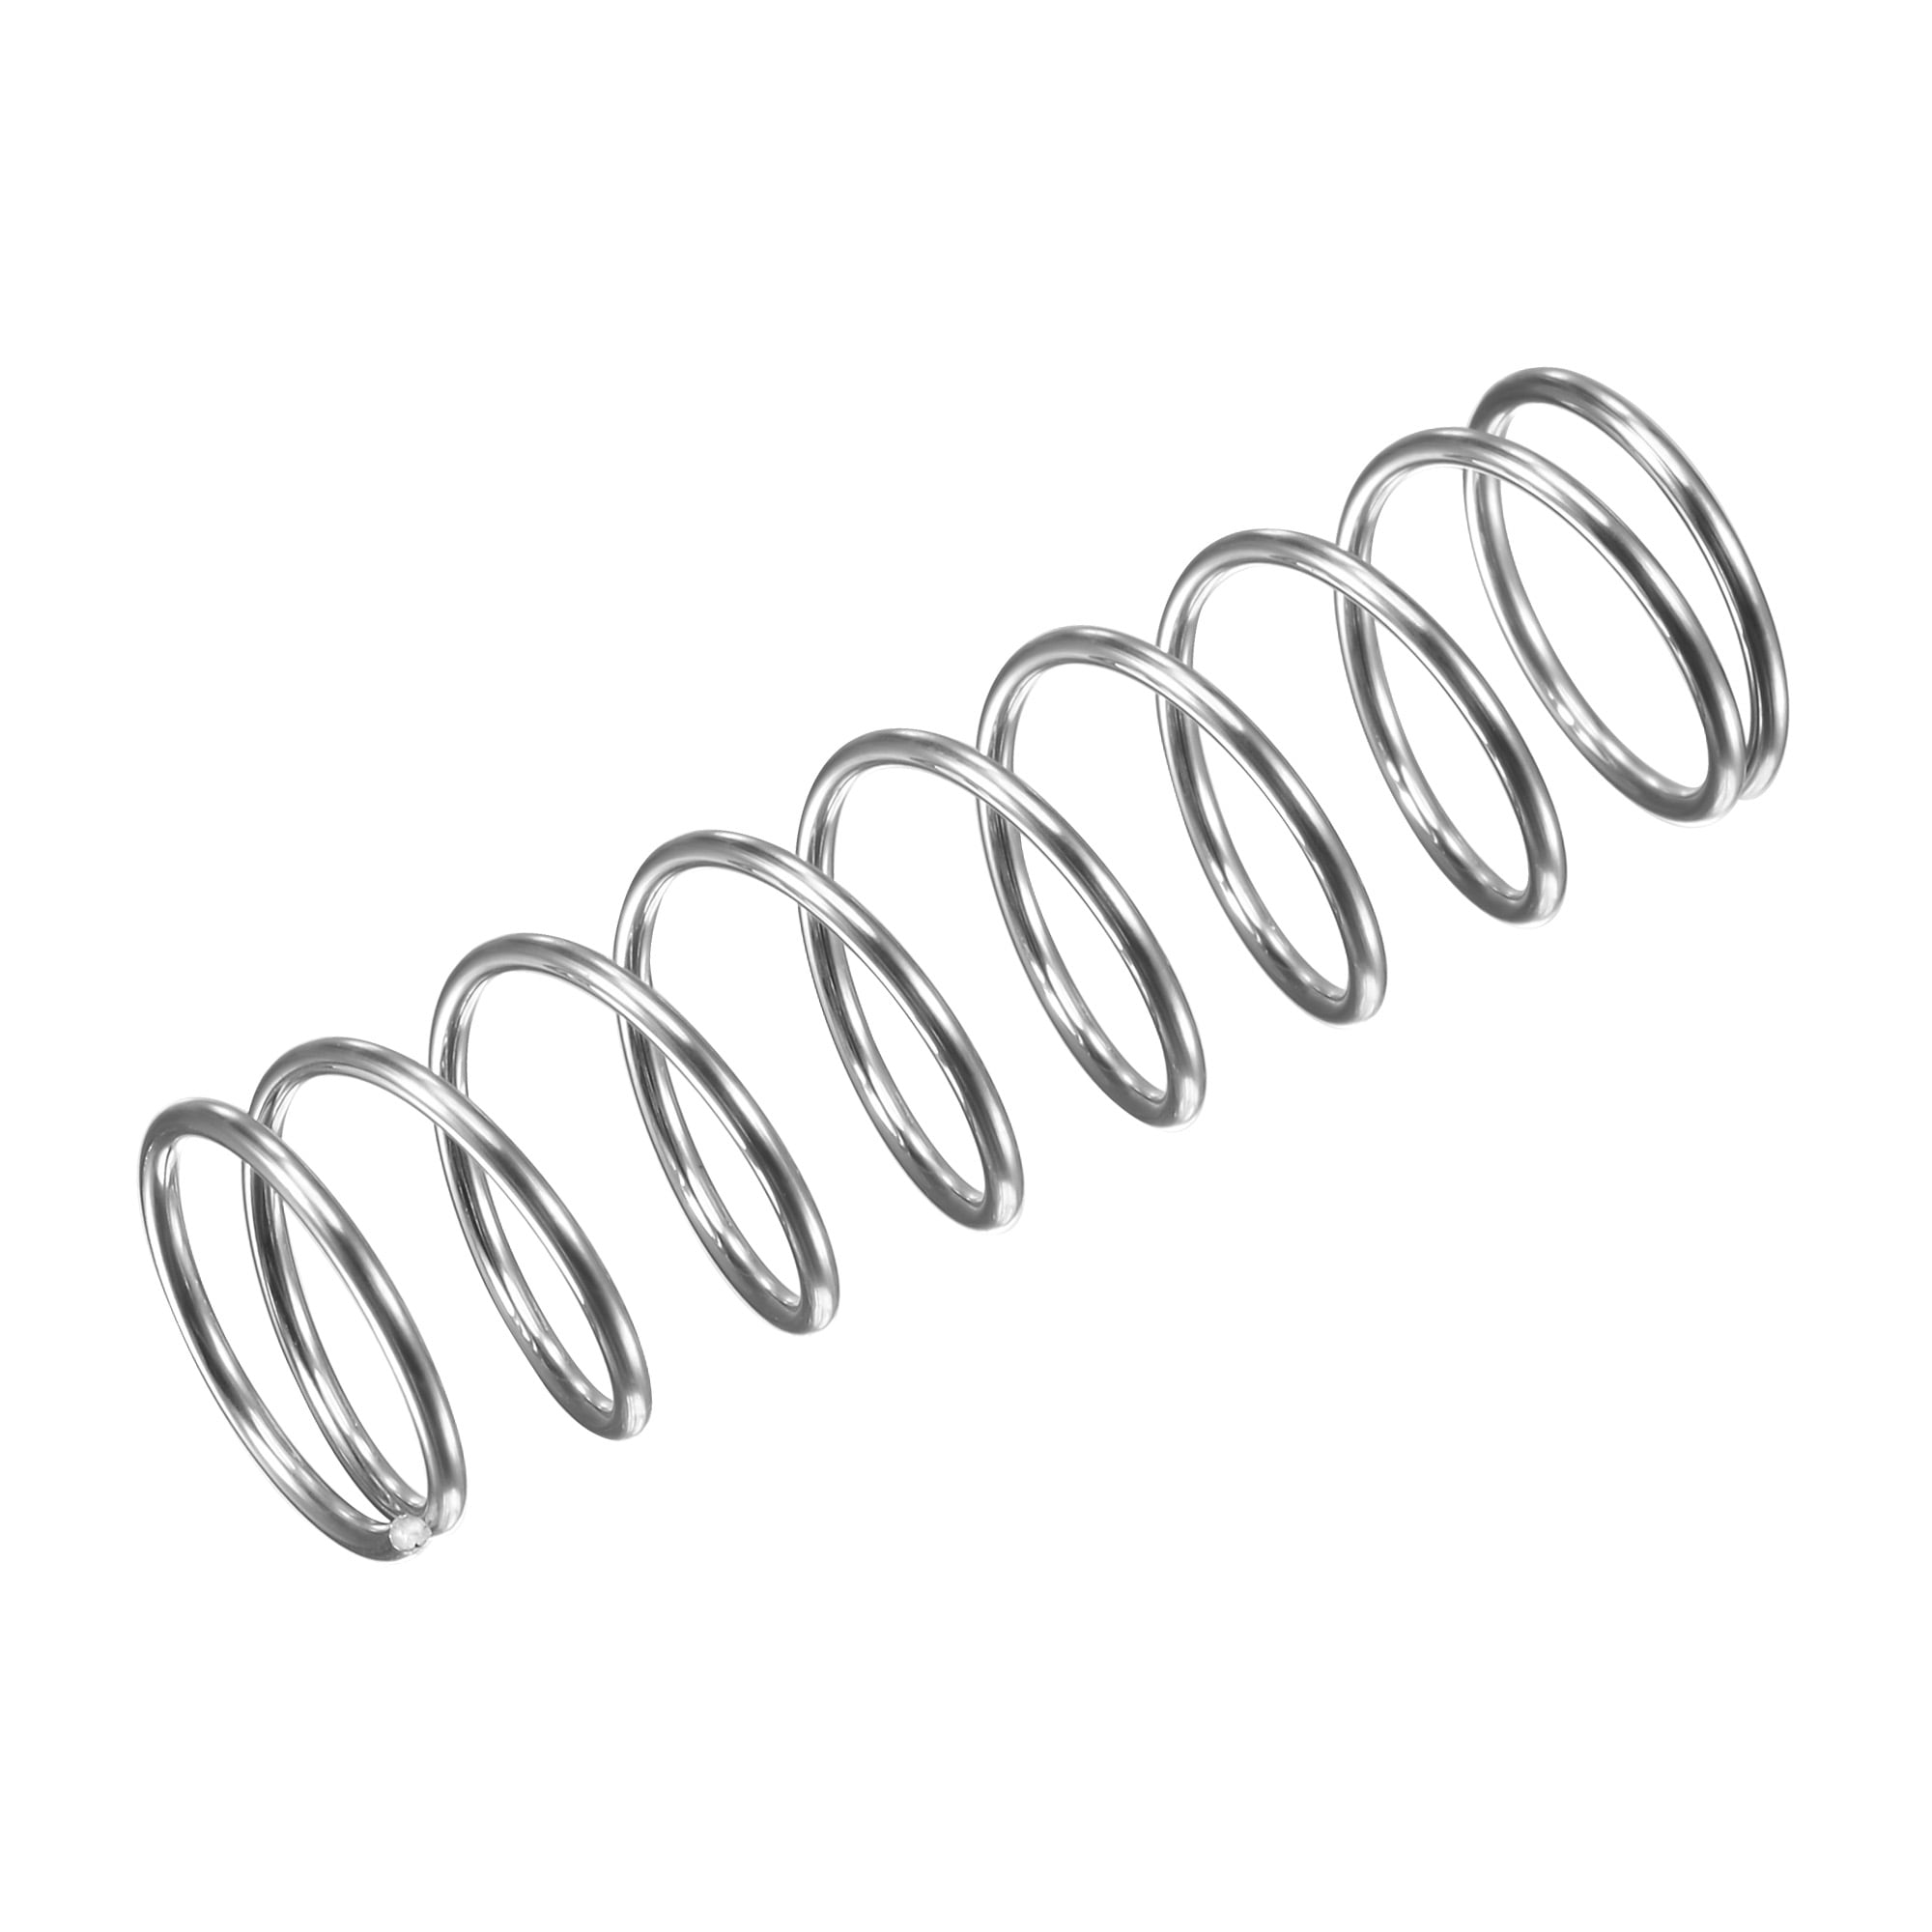 10pcs 304 Stainless Steel Spring Compression Pressure Compressed Small Spring